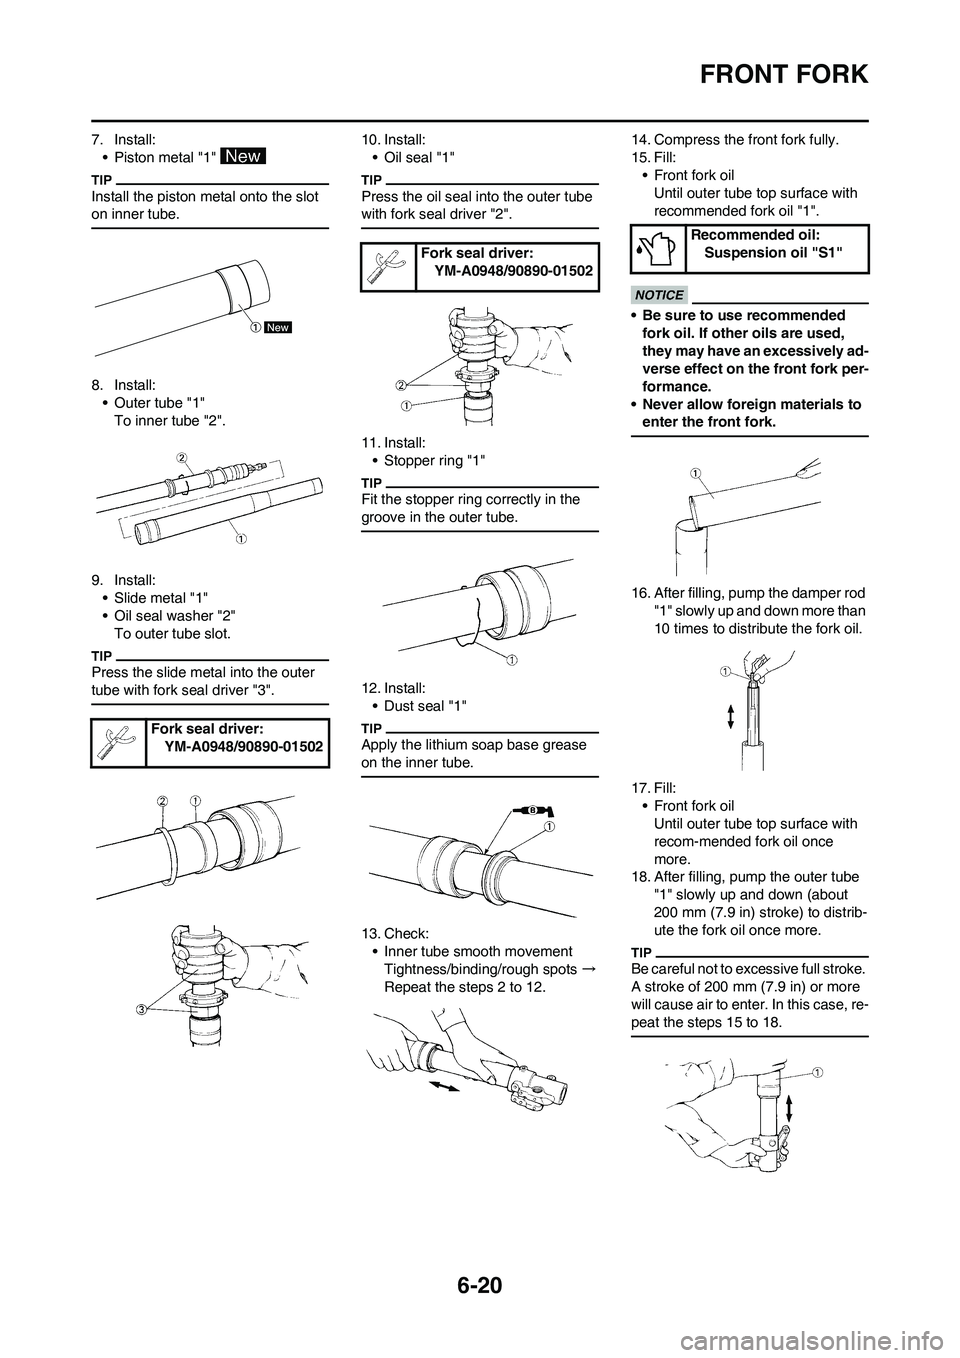 YAMAHA WR 250F 2011  Owners Manual 6-20
FRONT FORK
7. Install:
• Piston metal "1" 
Install the piston metal onto the slot 
on inner tube.
8. Install:
• Outer tube "1"
To inner tube "2".
9. Install:
• Slide metal "1"
• Oil seal 